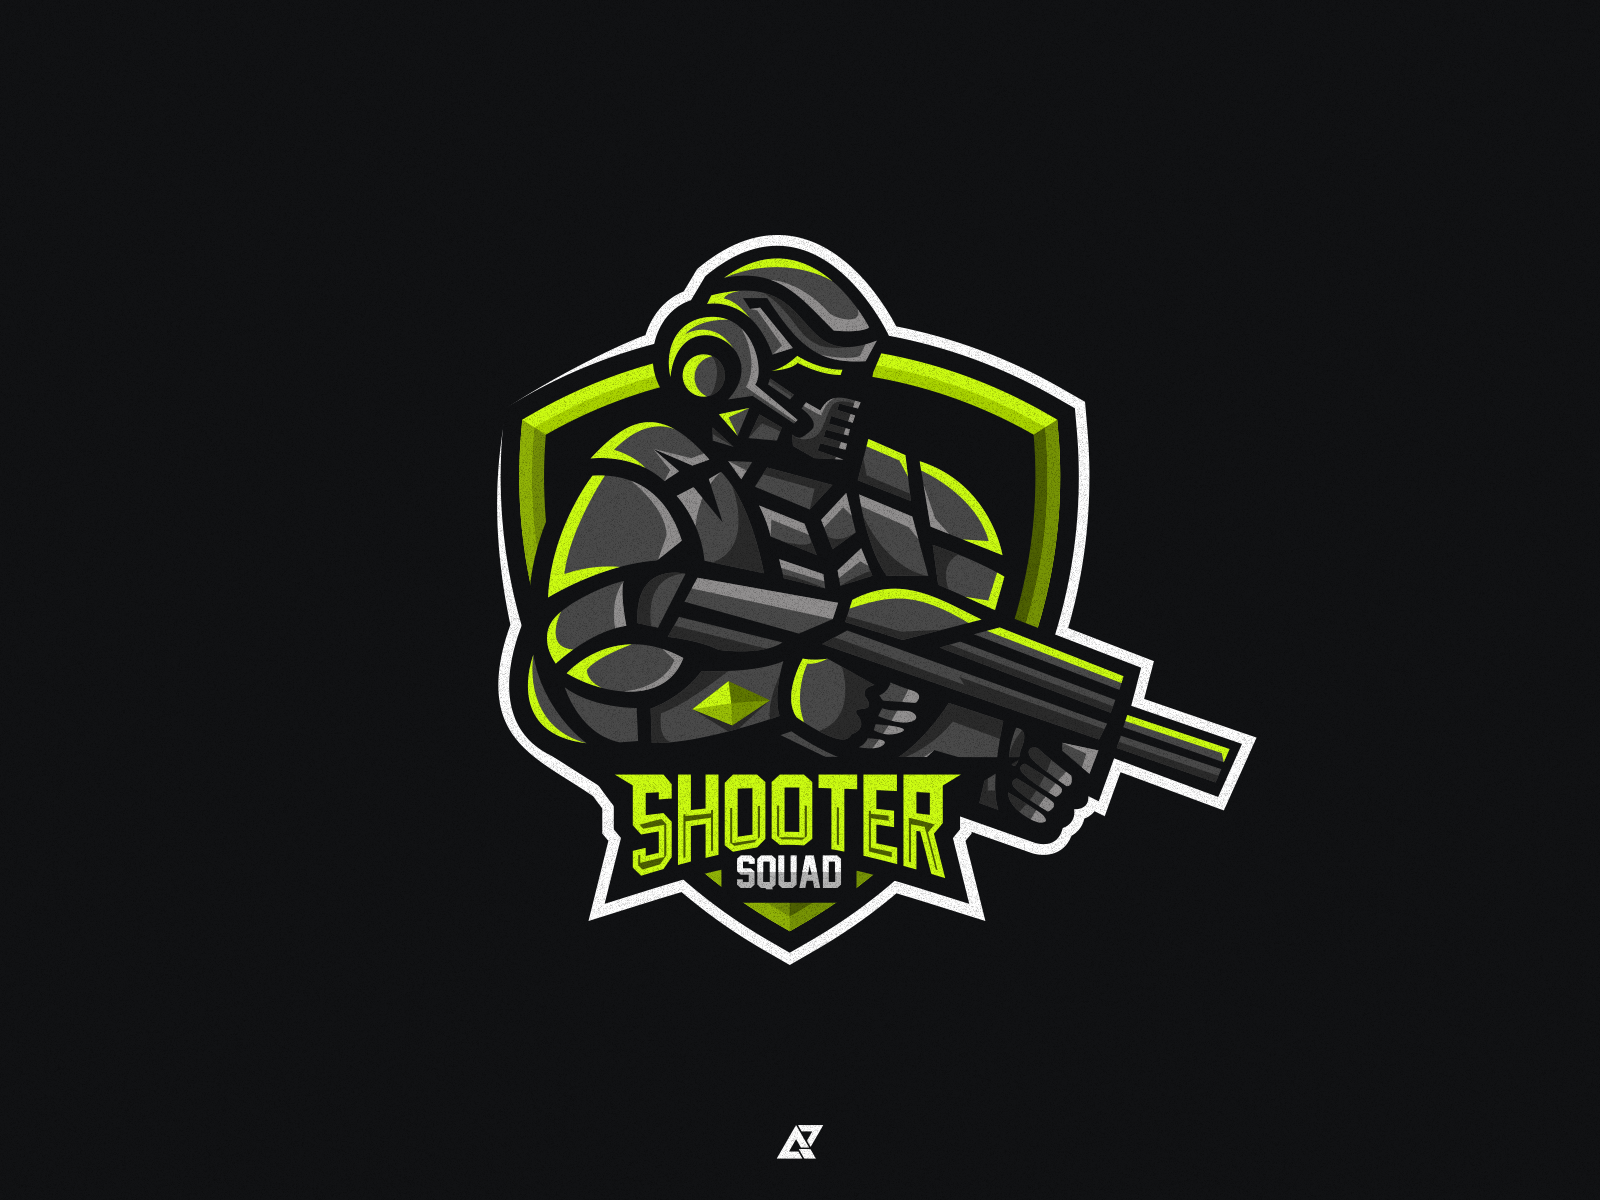 Dribbble - Shooter Army Mascot Logo Design.png by Qr Design Studio